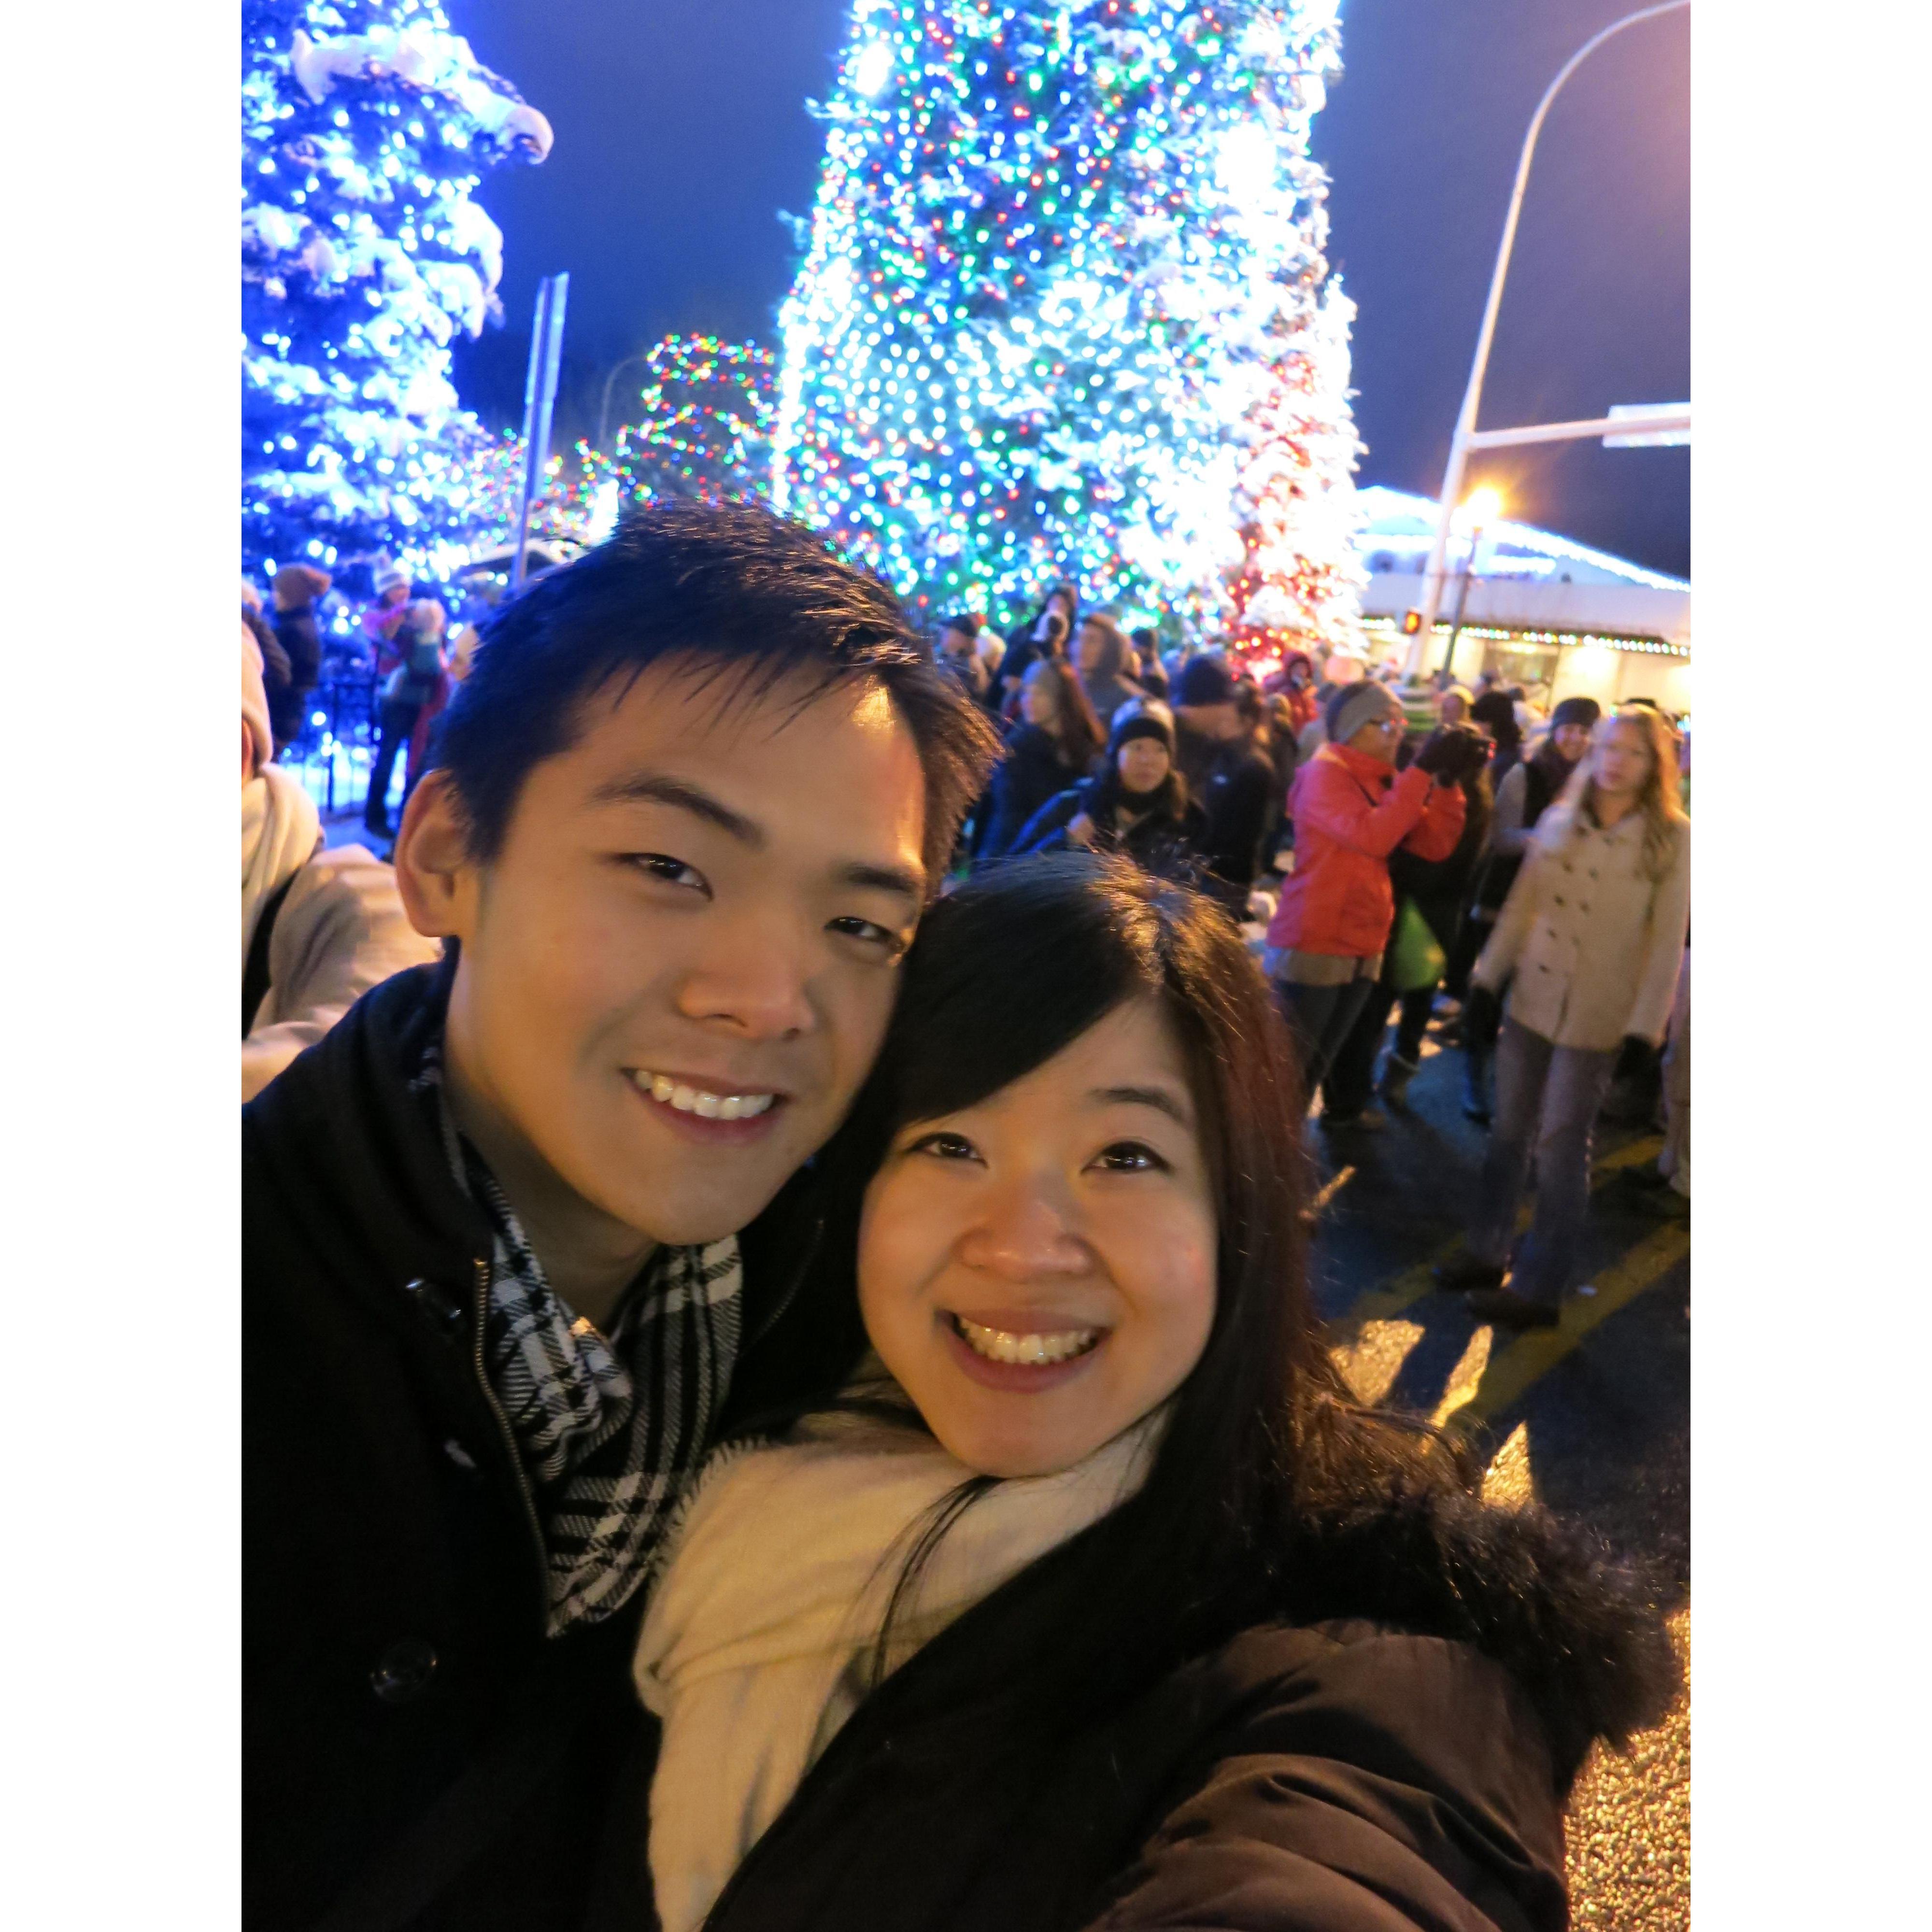 In 2015, we went to our first Leavenworth Christmas Tree Lighting!